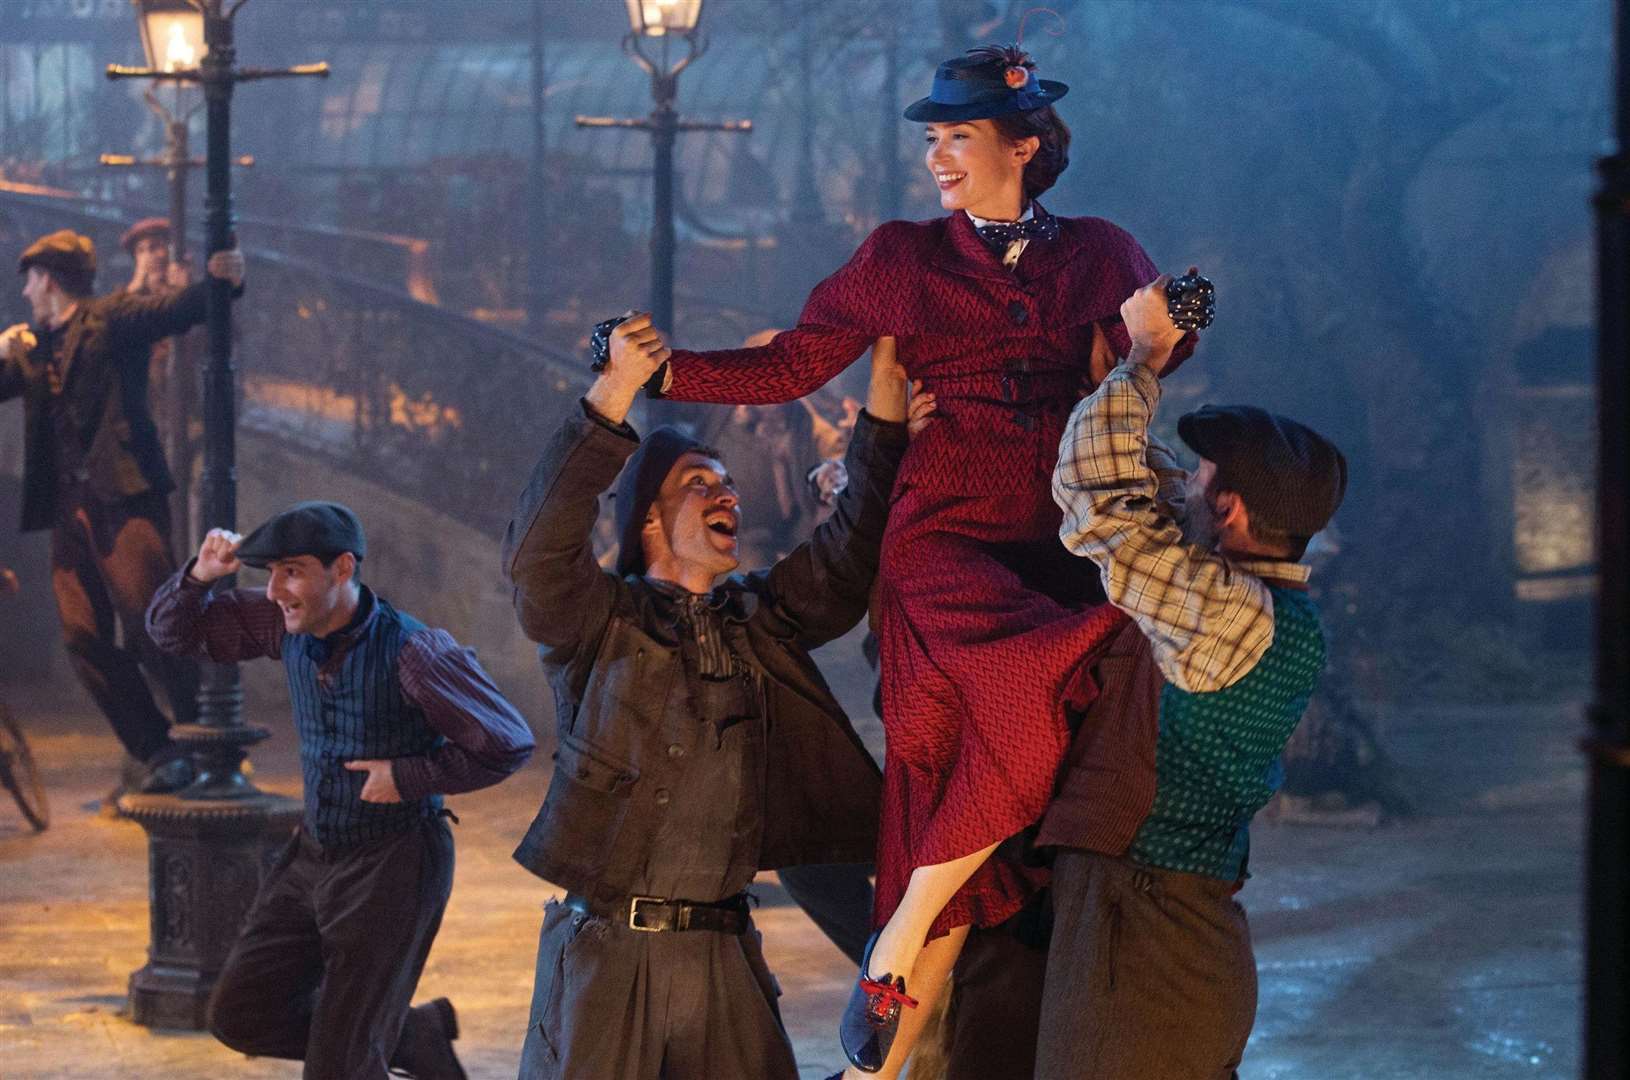 Emily Blunt as Mary Poppins. Picture: PA Photo/Disney Enterprises, Inc./Jay Maidment